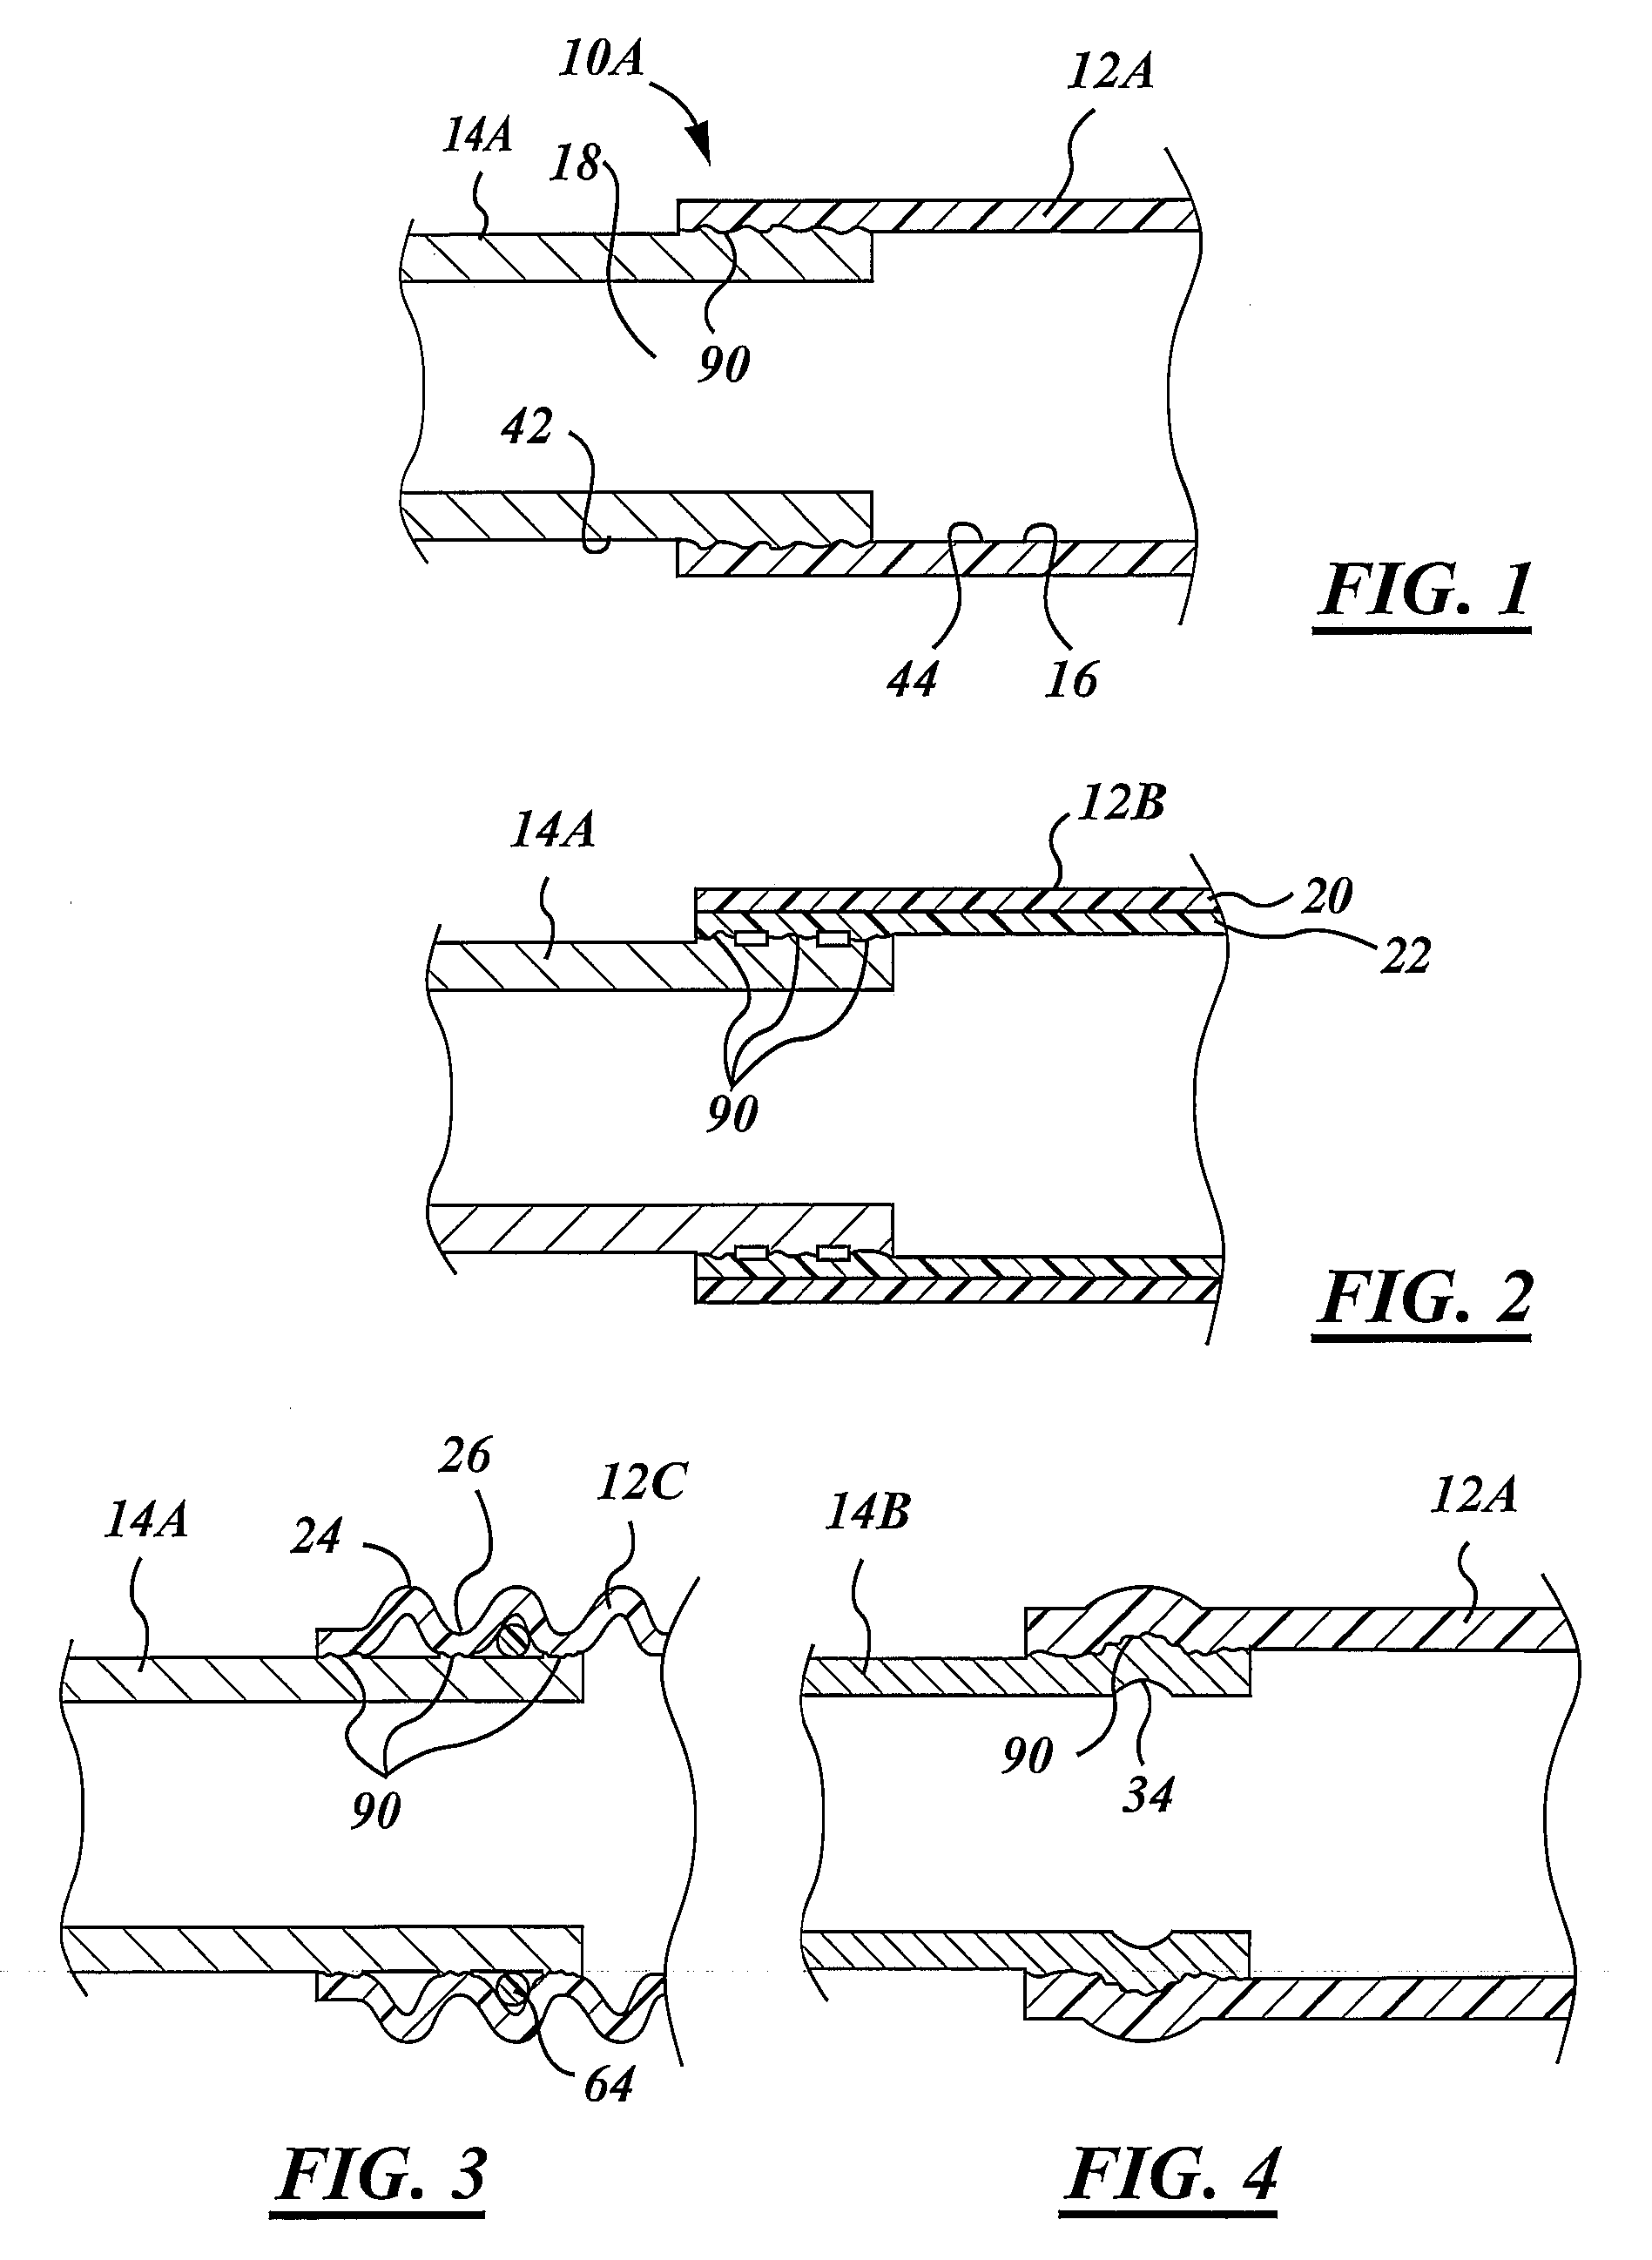 Method of coupling plastic components to metal tubing